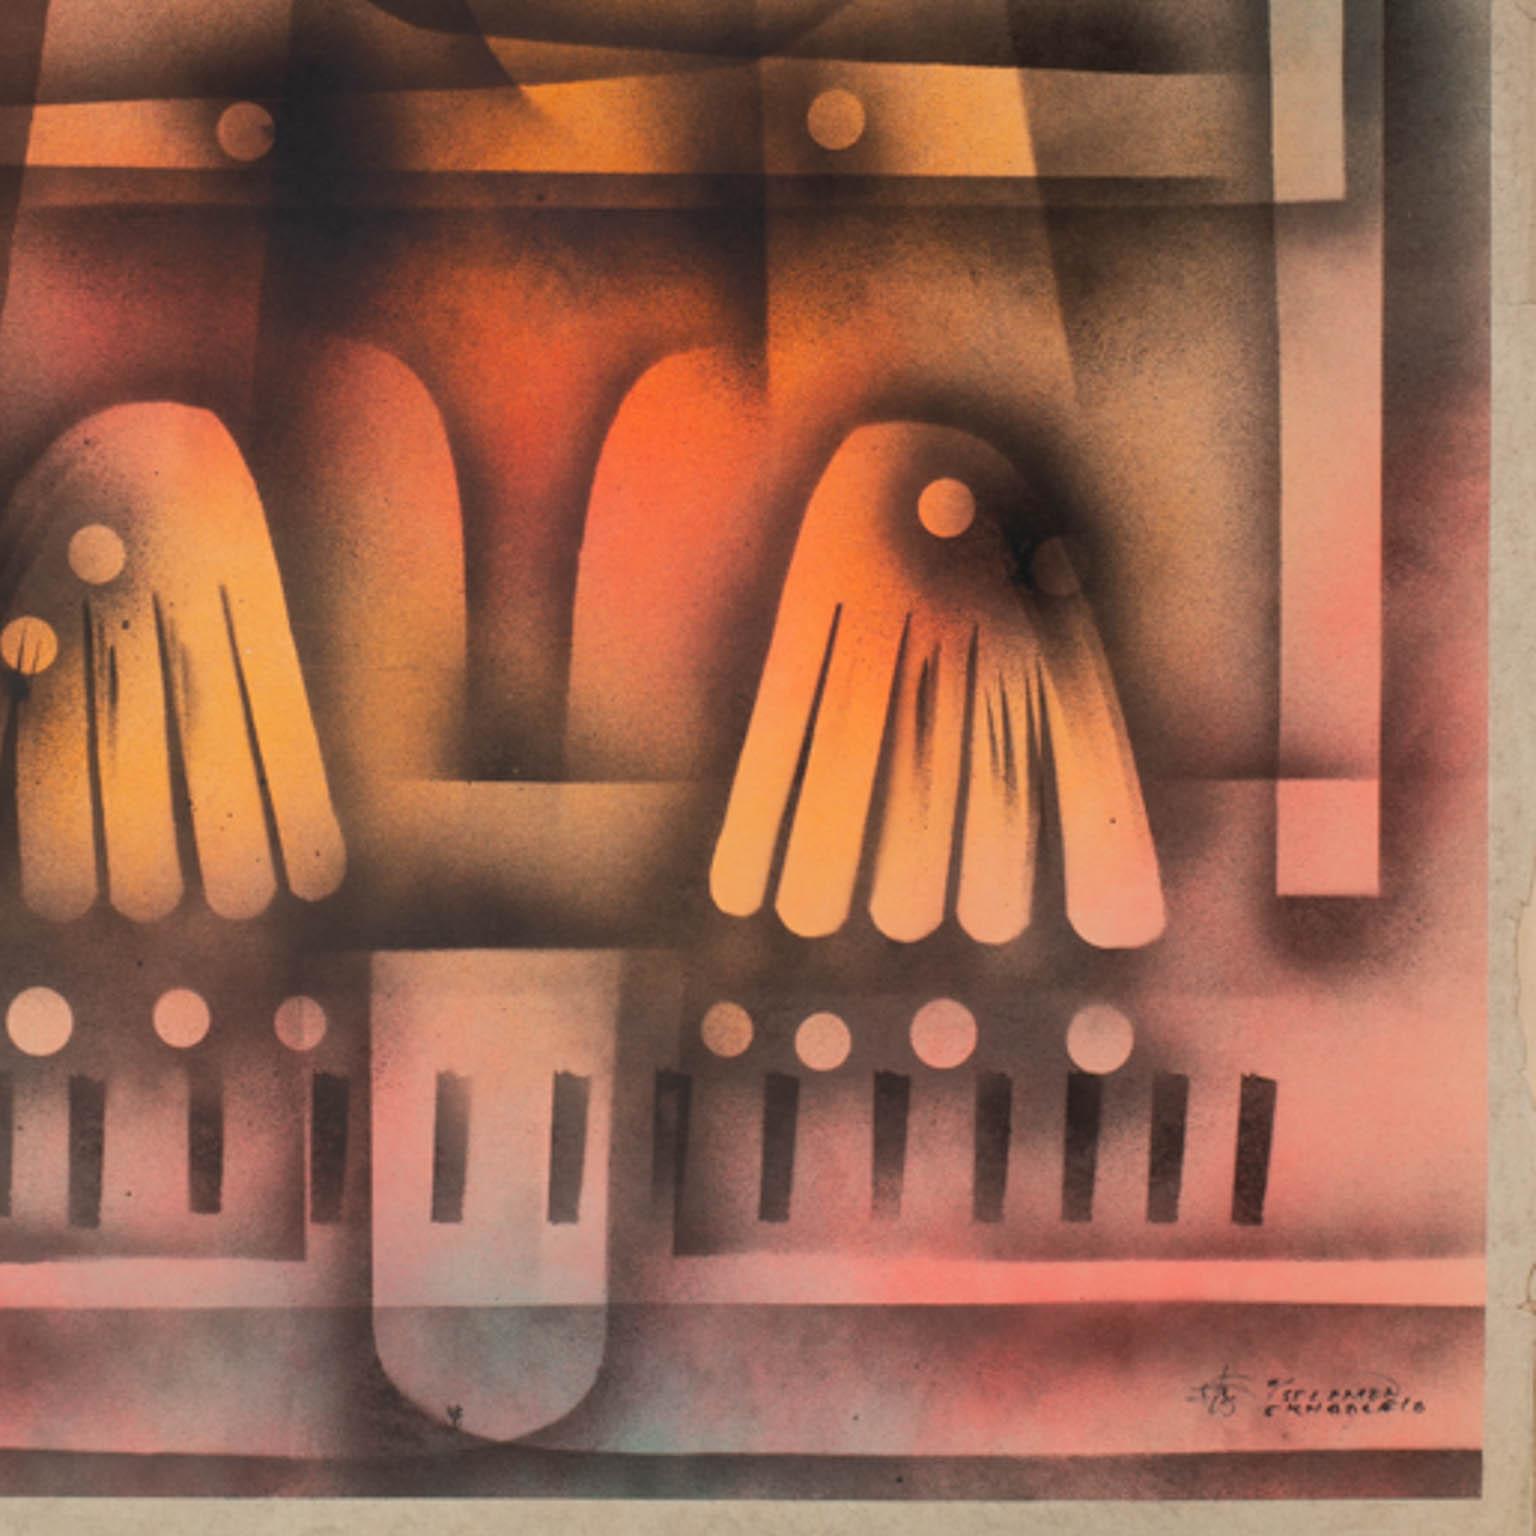 Solomon Sekhaolelo Abstract Pianist, Soweto, South Africa.  

Solomon Sekhaolelo, an Ndebele artist, was born in 1937 in Heidelberg, Gaauteng.

In 1947 his family moved to Soweto, where he went to school. He spent a very happy childhood with his